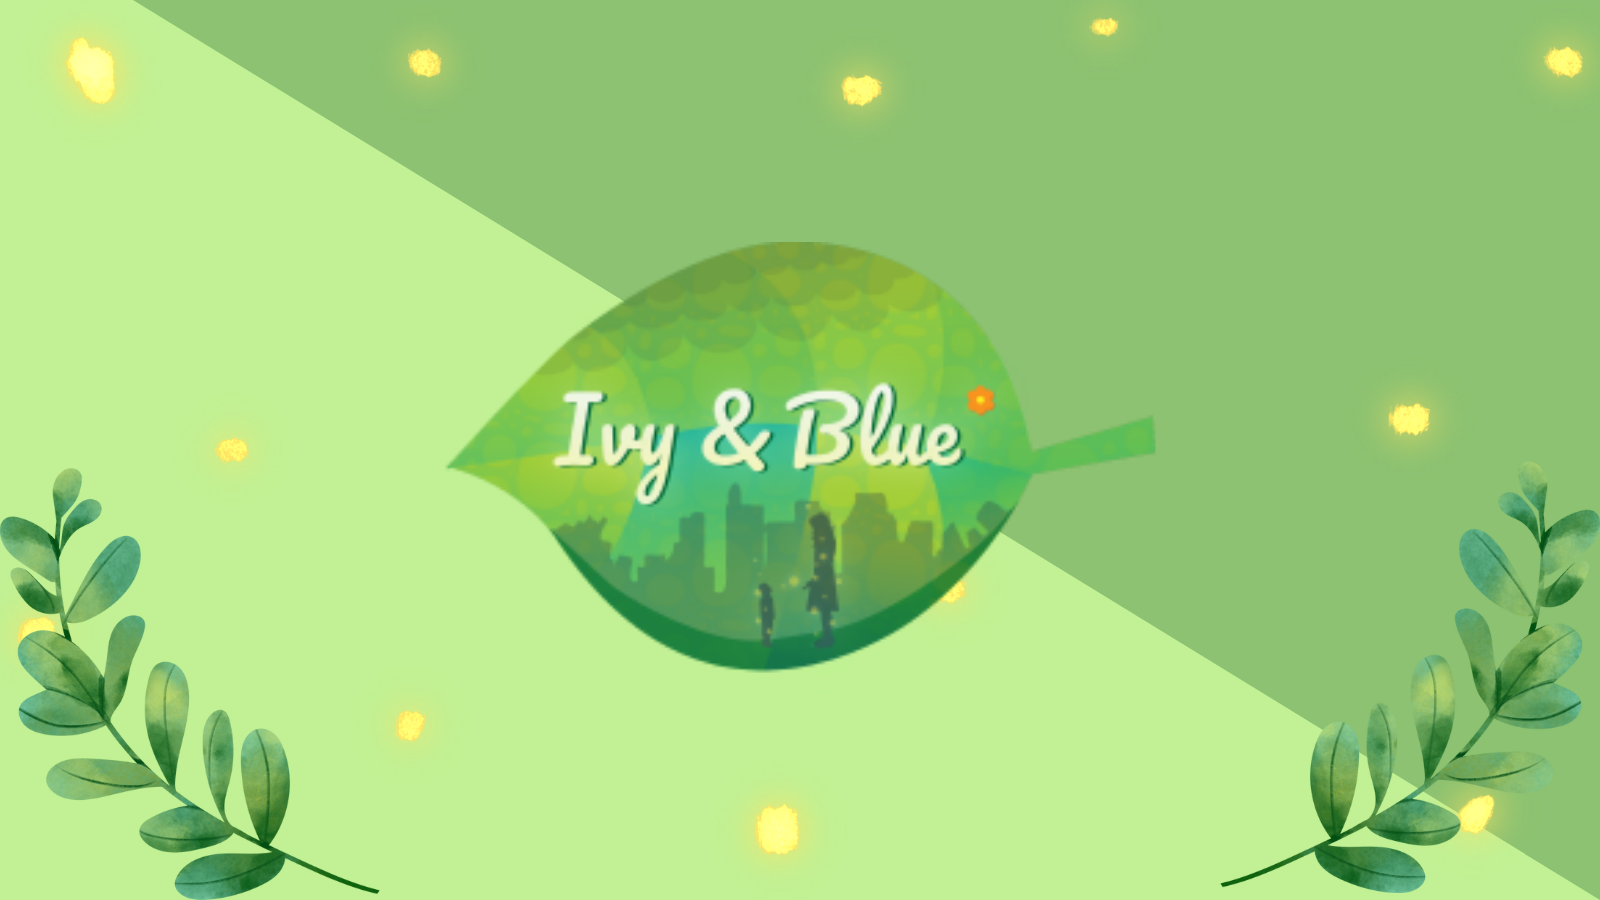 Ivy and Blue